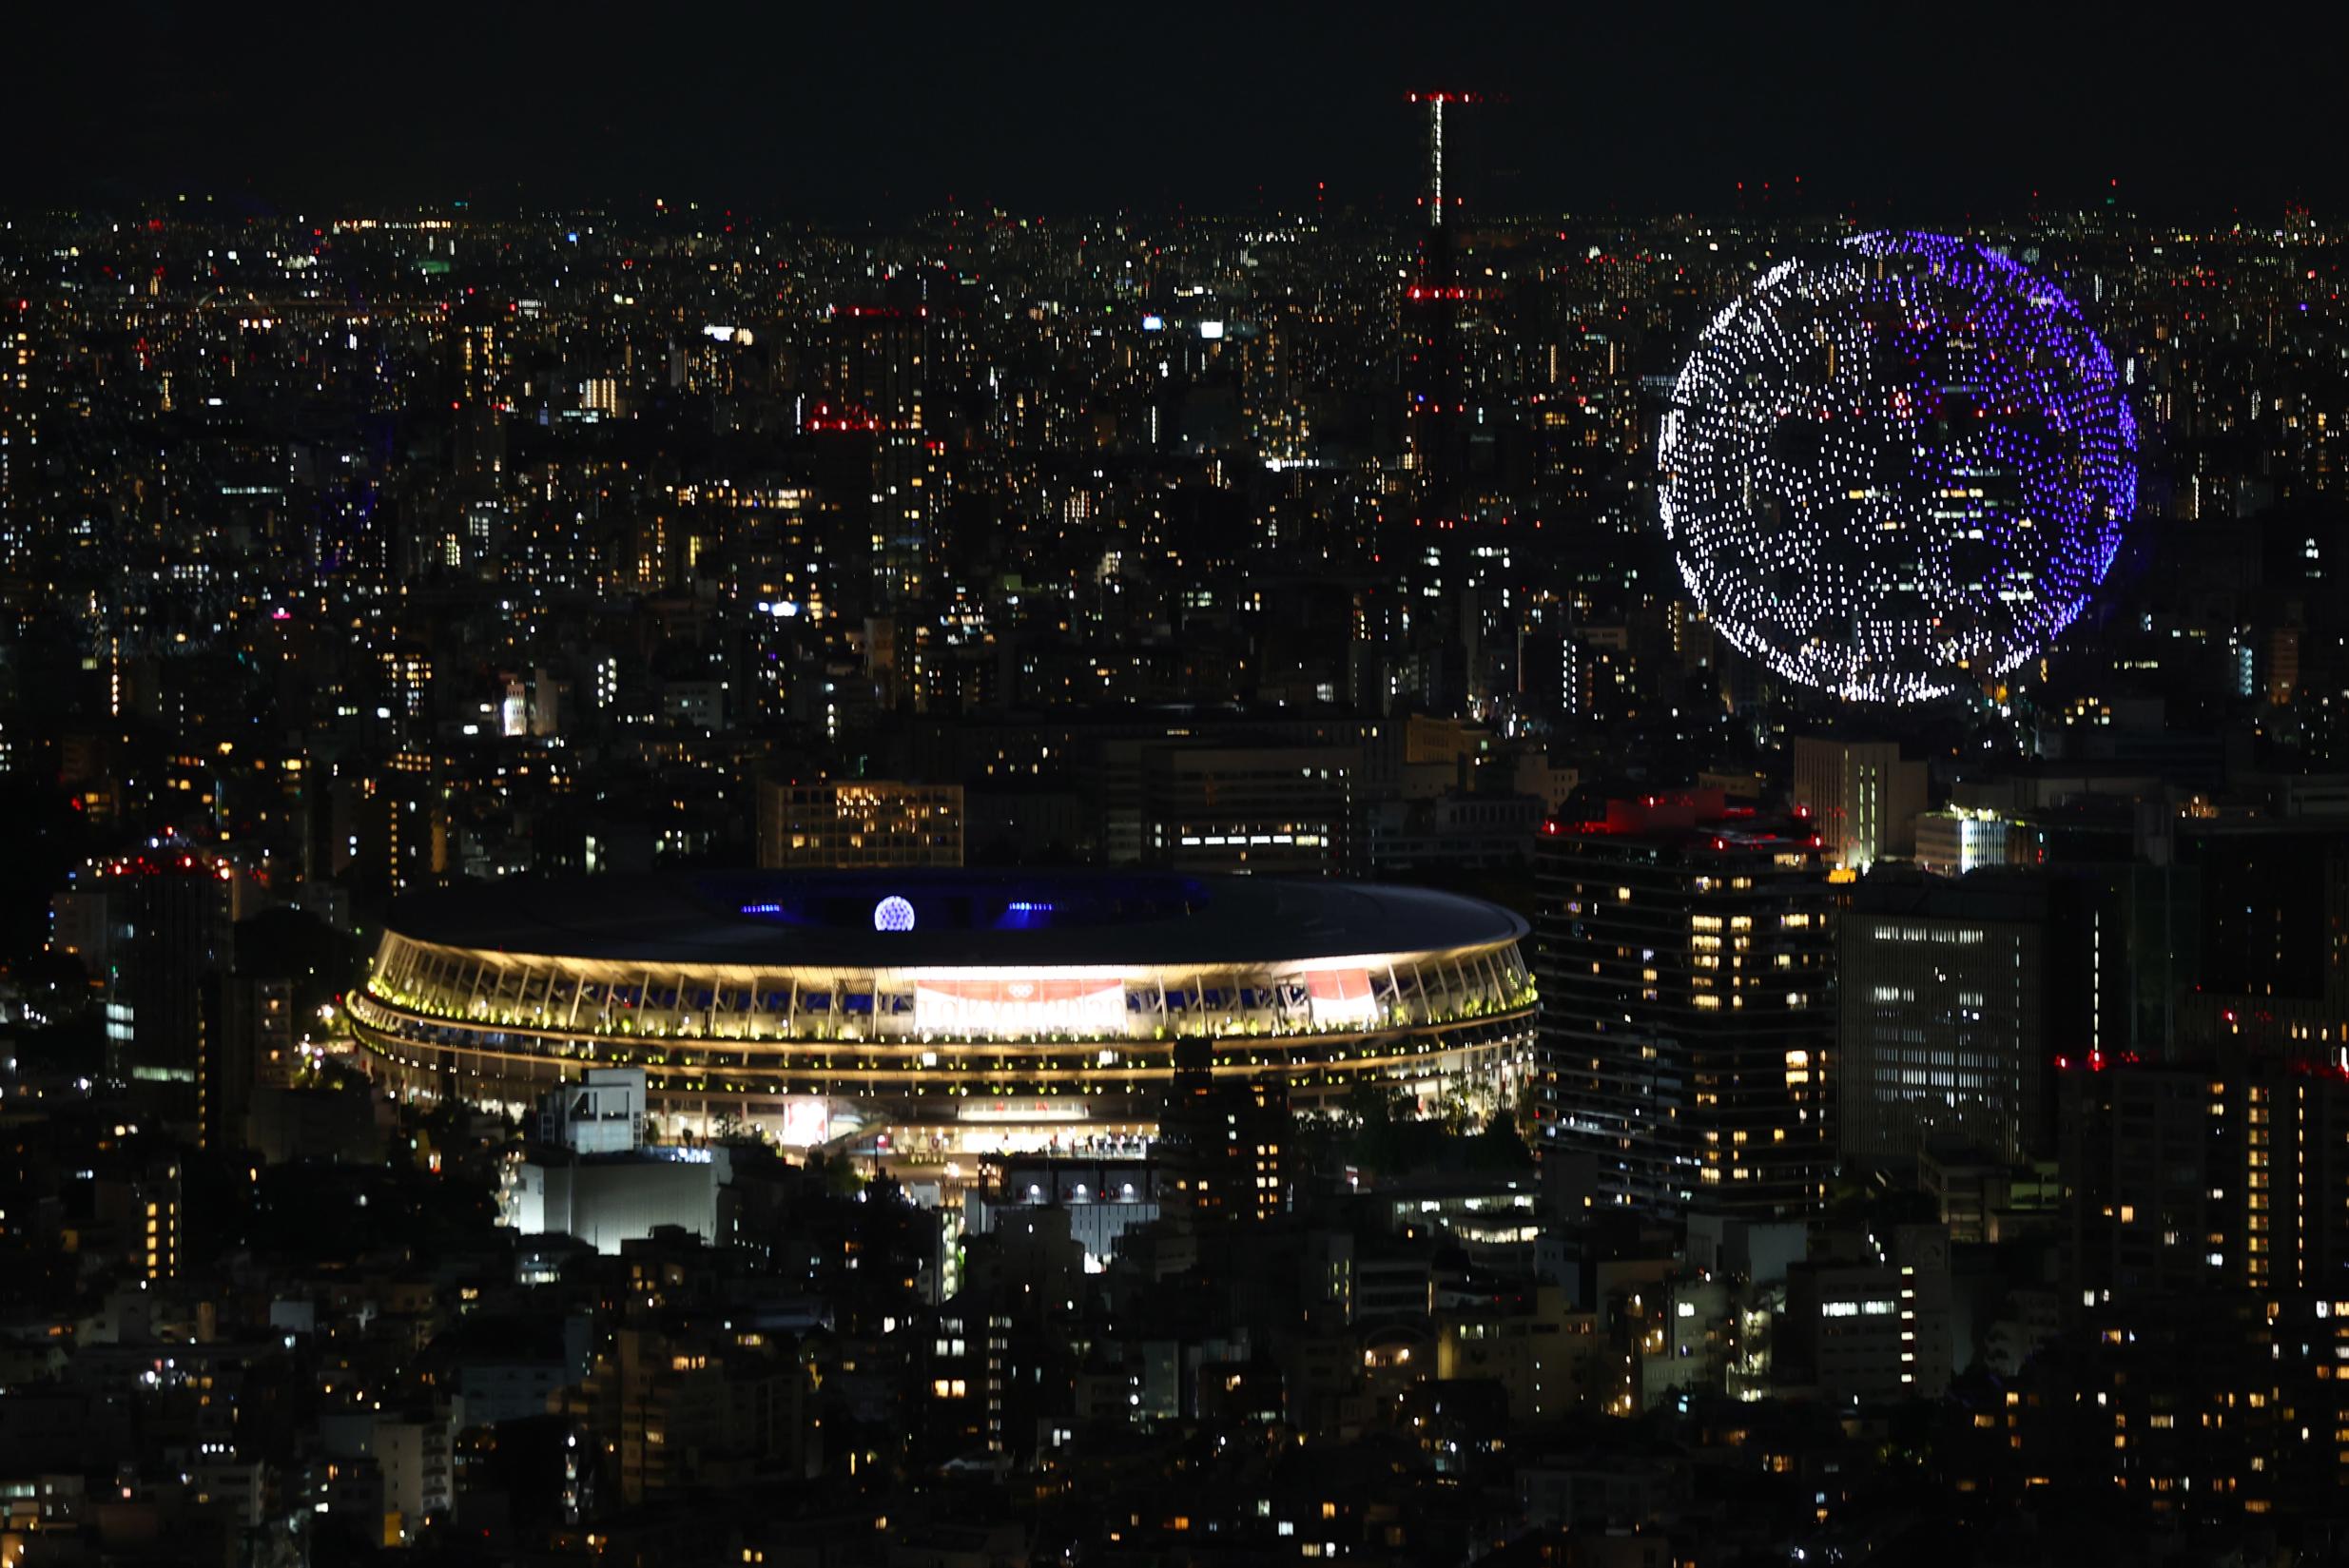 Olympics opening ceremony included a light display with drones | Engadget